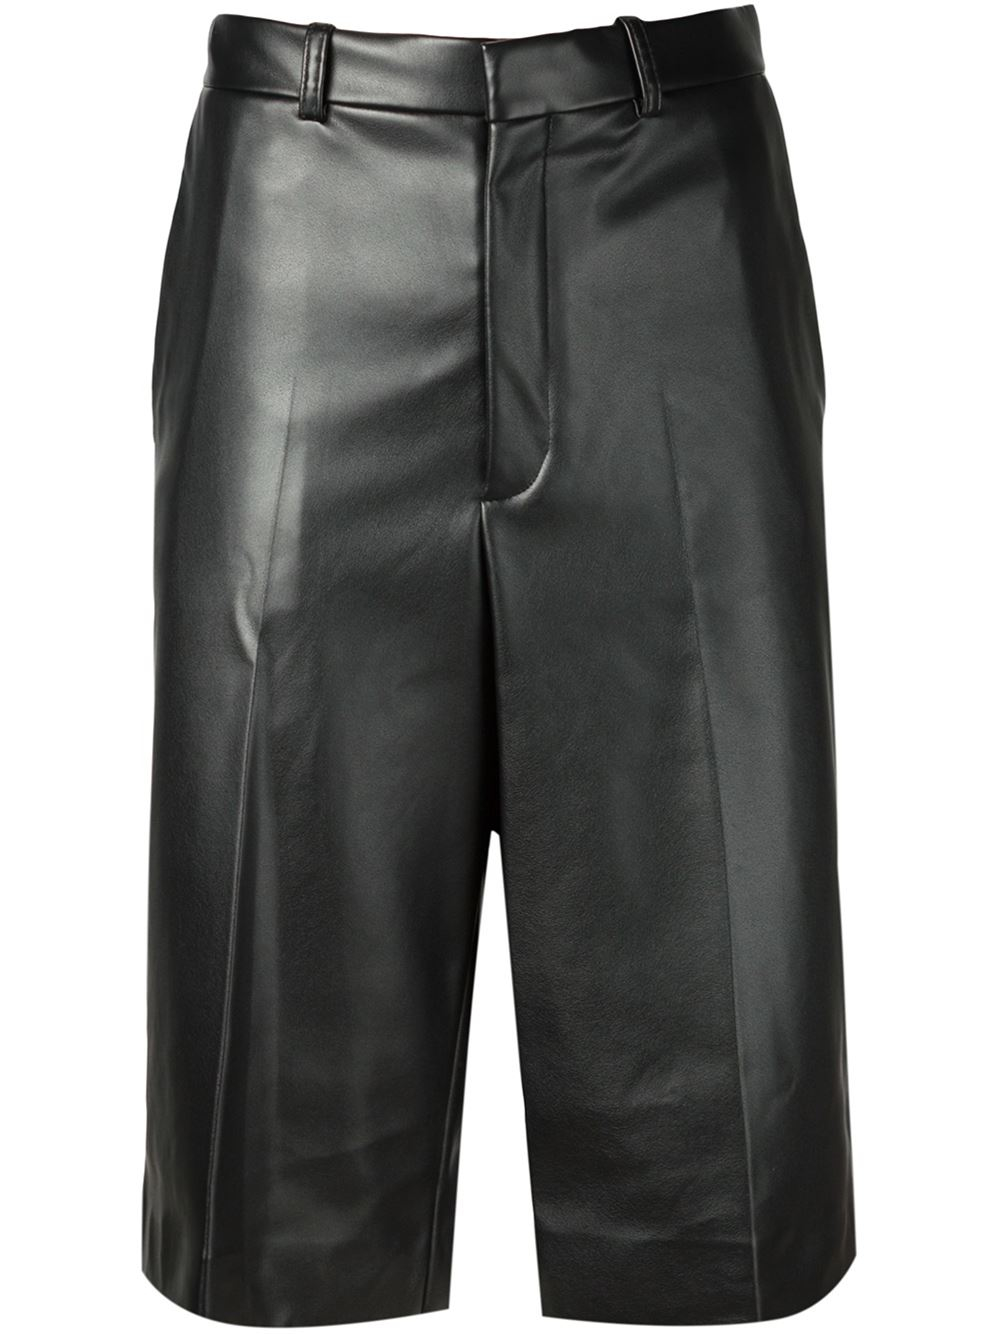 Viktor & Rolf Faux Leather Knee-length Shorts in Black | Lyst